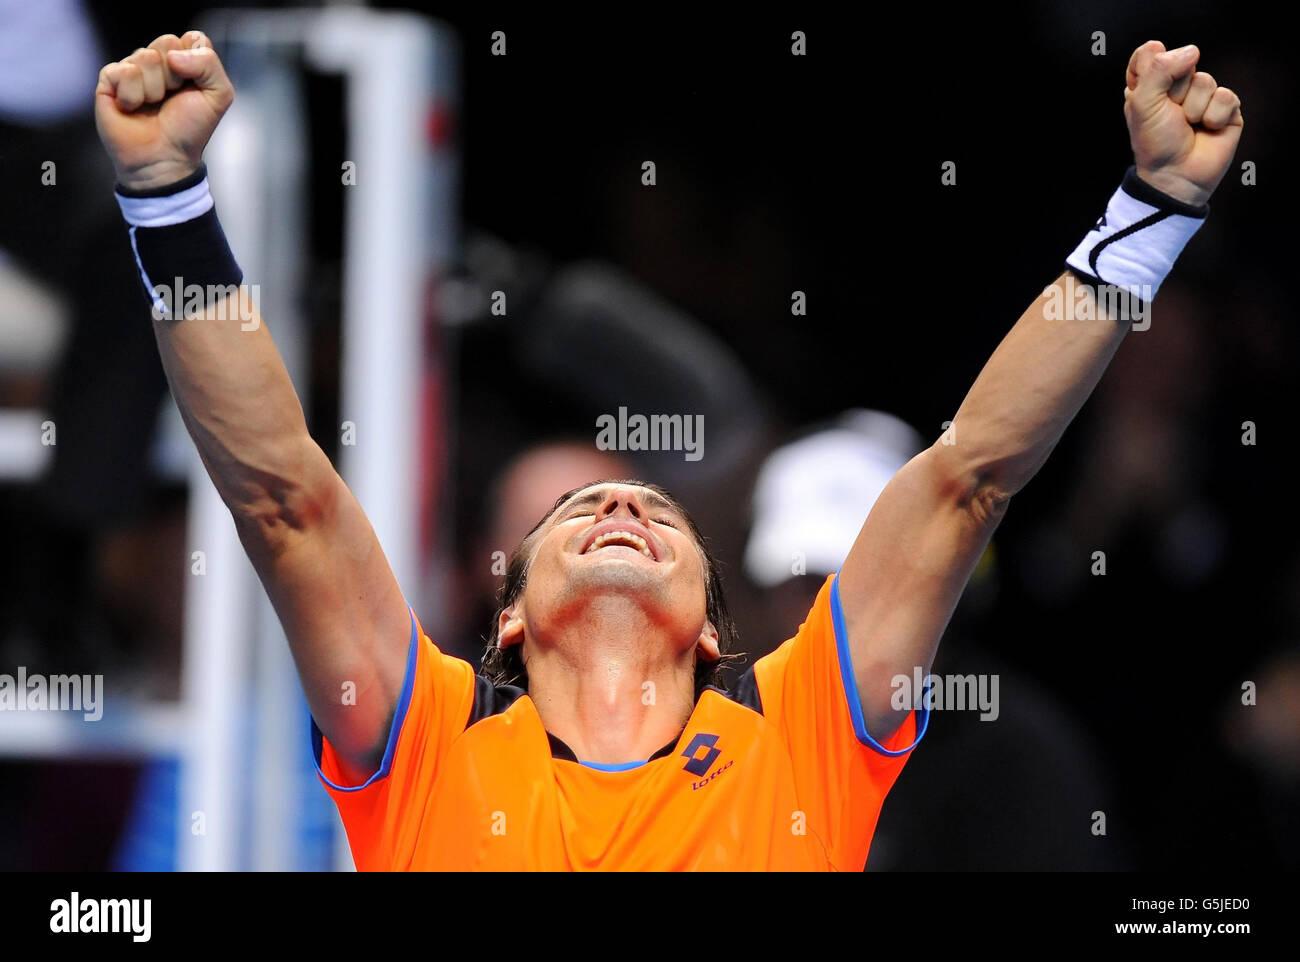 Spain's David Ferrer celebrates victory in his match against Argentina's Juan Martin del Potro during the Barclays ATP World Tour Finals at the O2 Arena, London. Stock Photo